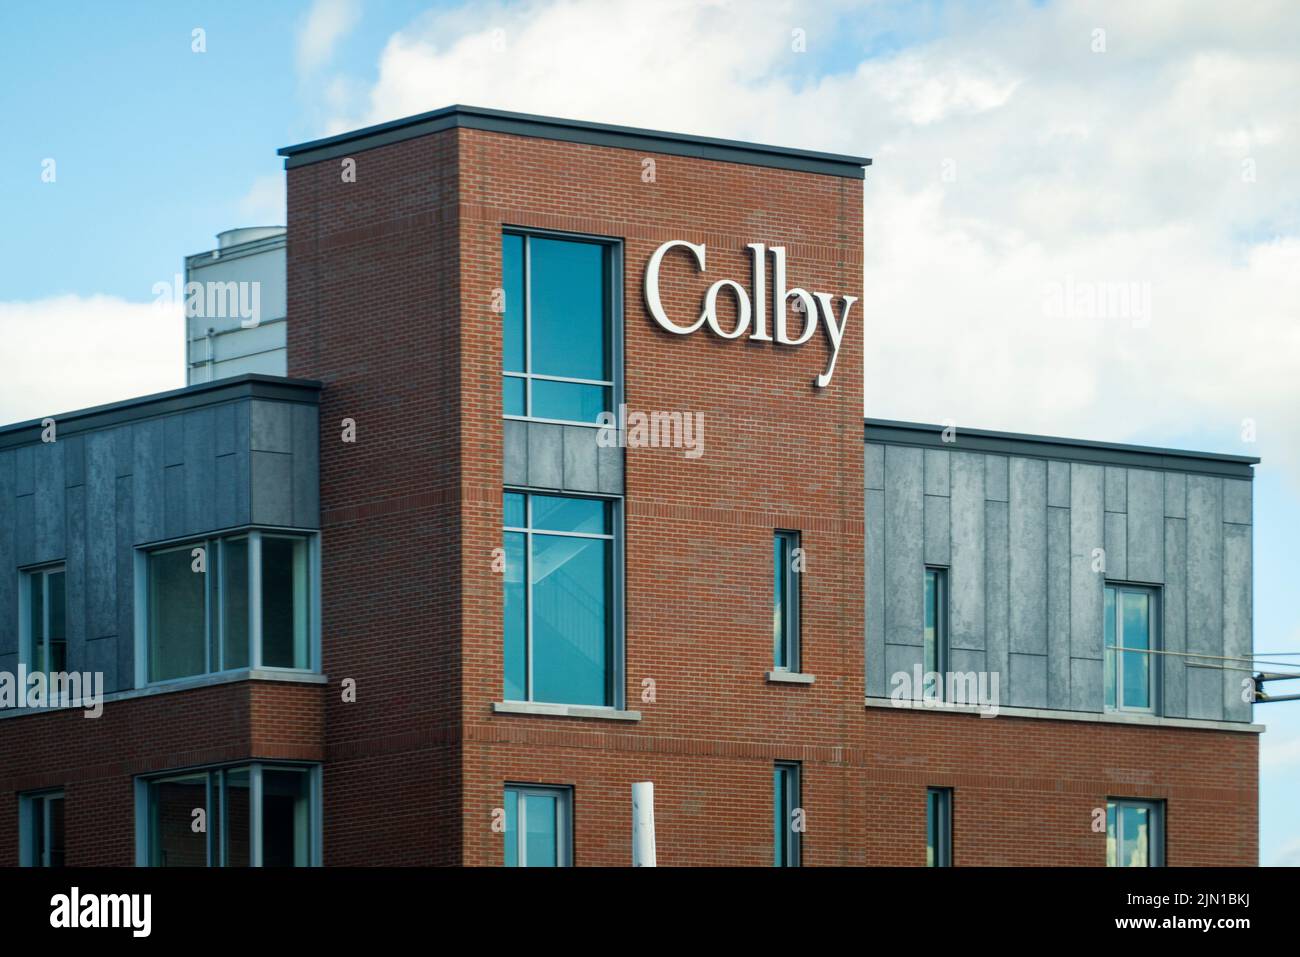 Colby College building in Waterville Maine Stock Photo